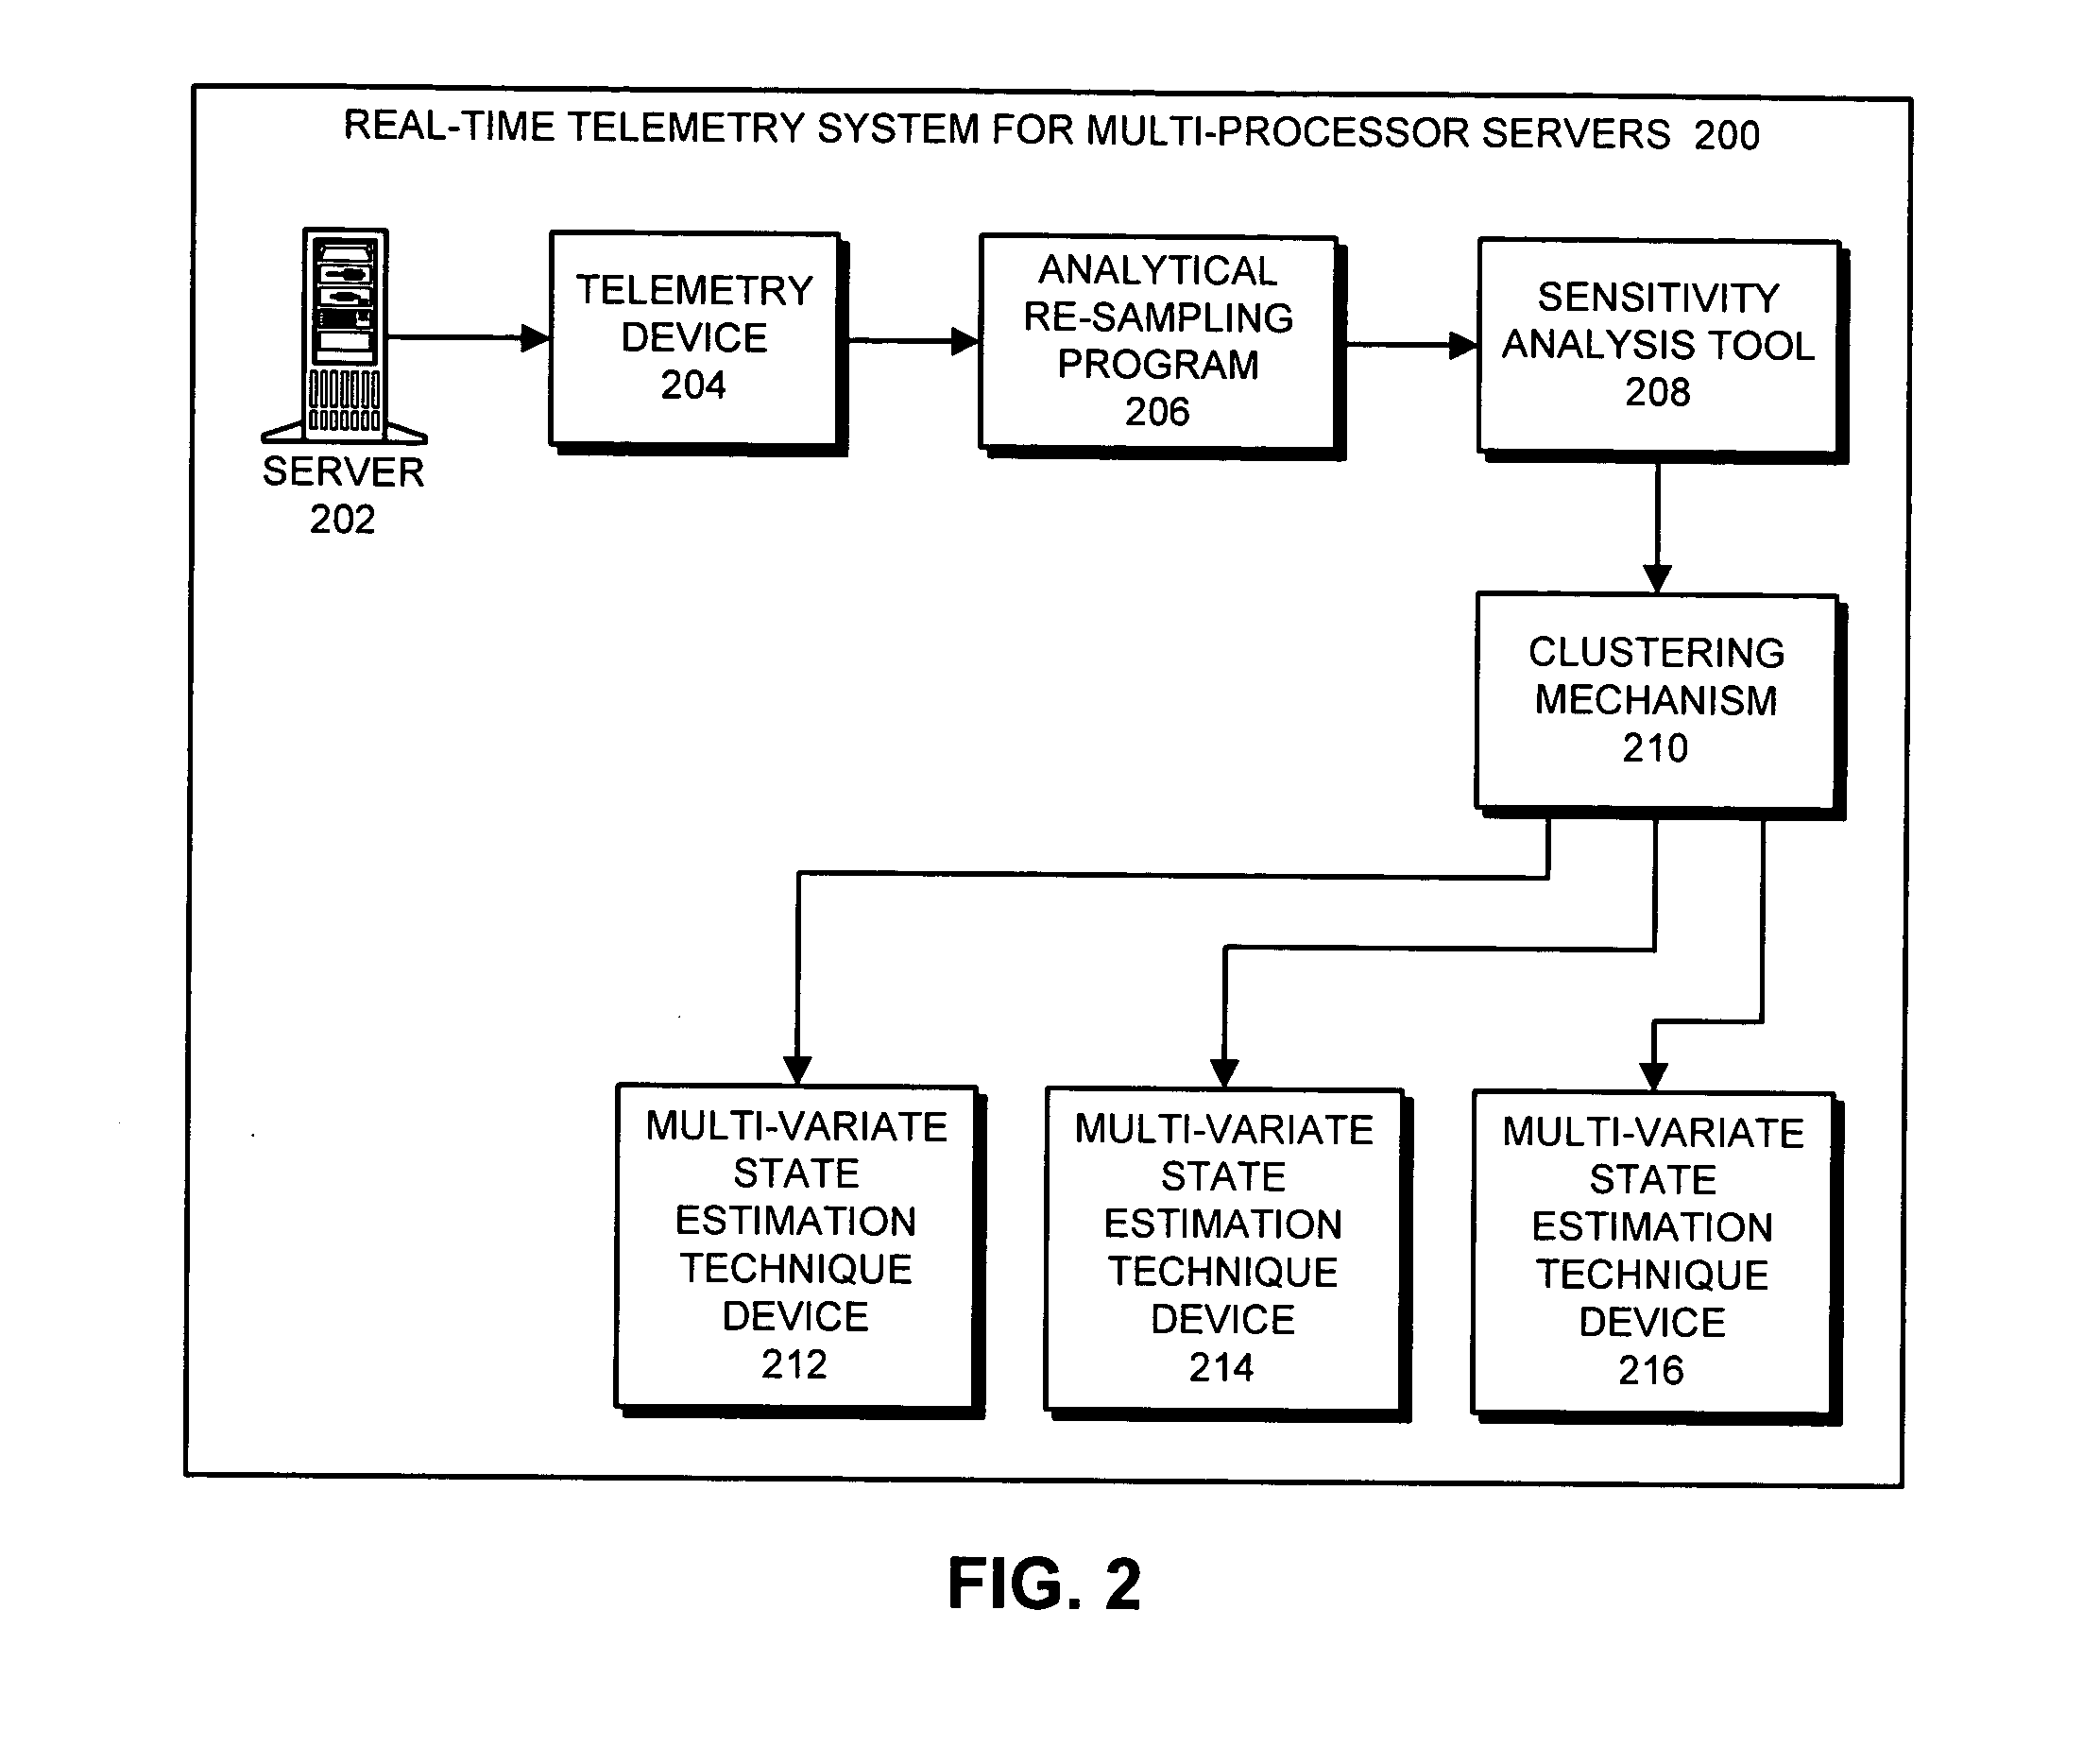 Correlating and aligning monitored signals for computer system performance parameters